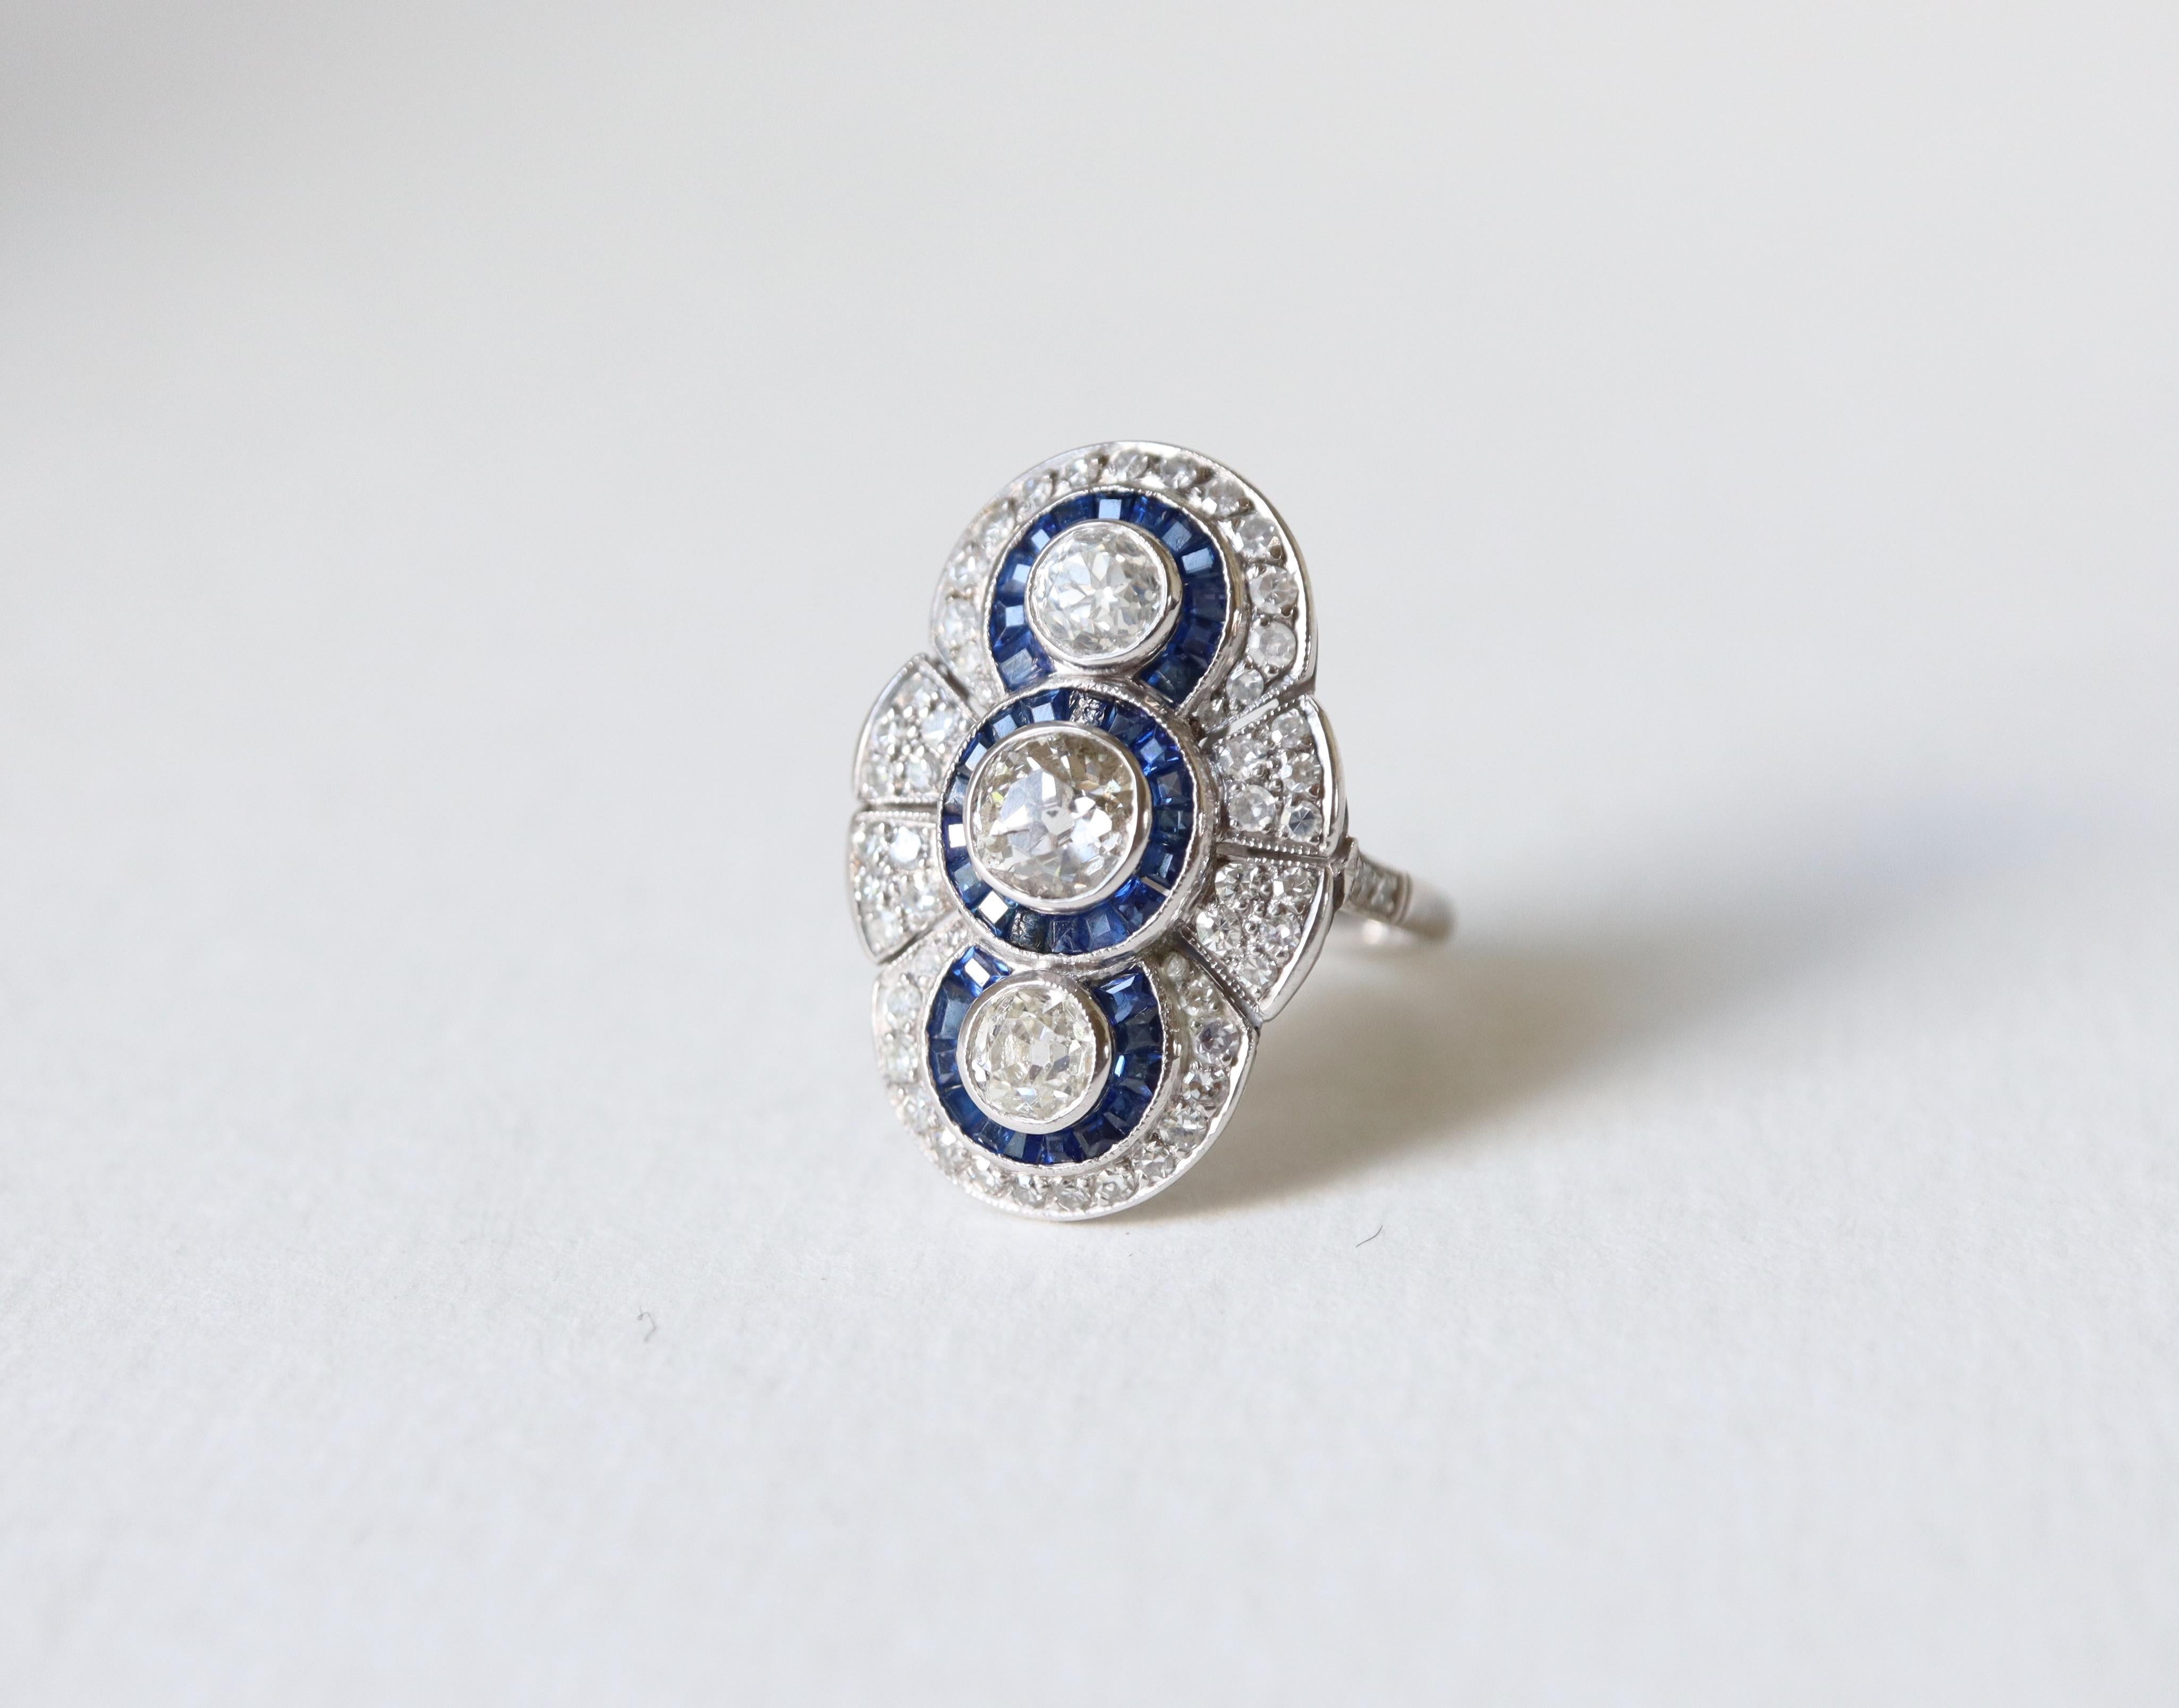 Marquise ring circa 1920-1930 in platinum set with calibrated diamonds and sapphires.
This ring with a typical geometric pattern from the 1920s-1930s is adorned with 3 larger diamonds weighing approximately 0.50 carat for the center one, and 0.25